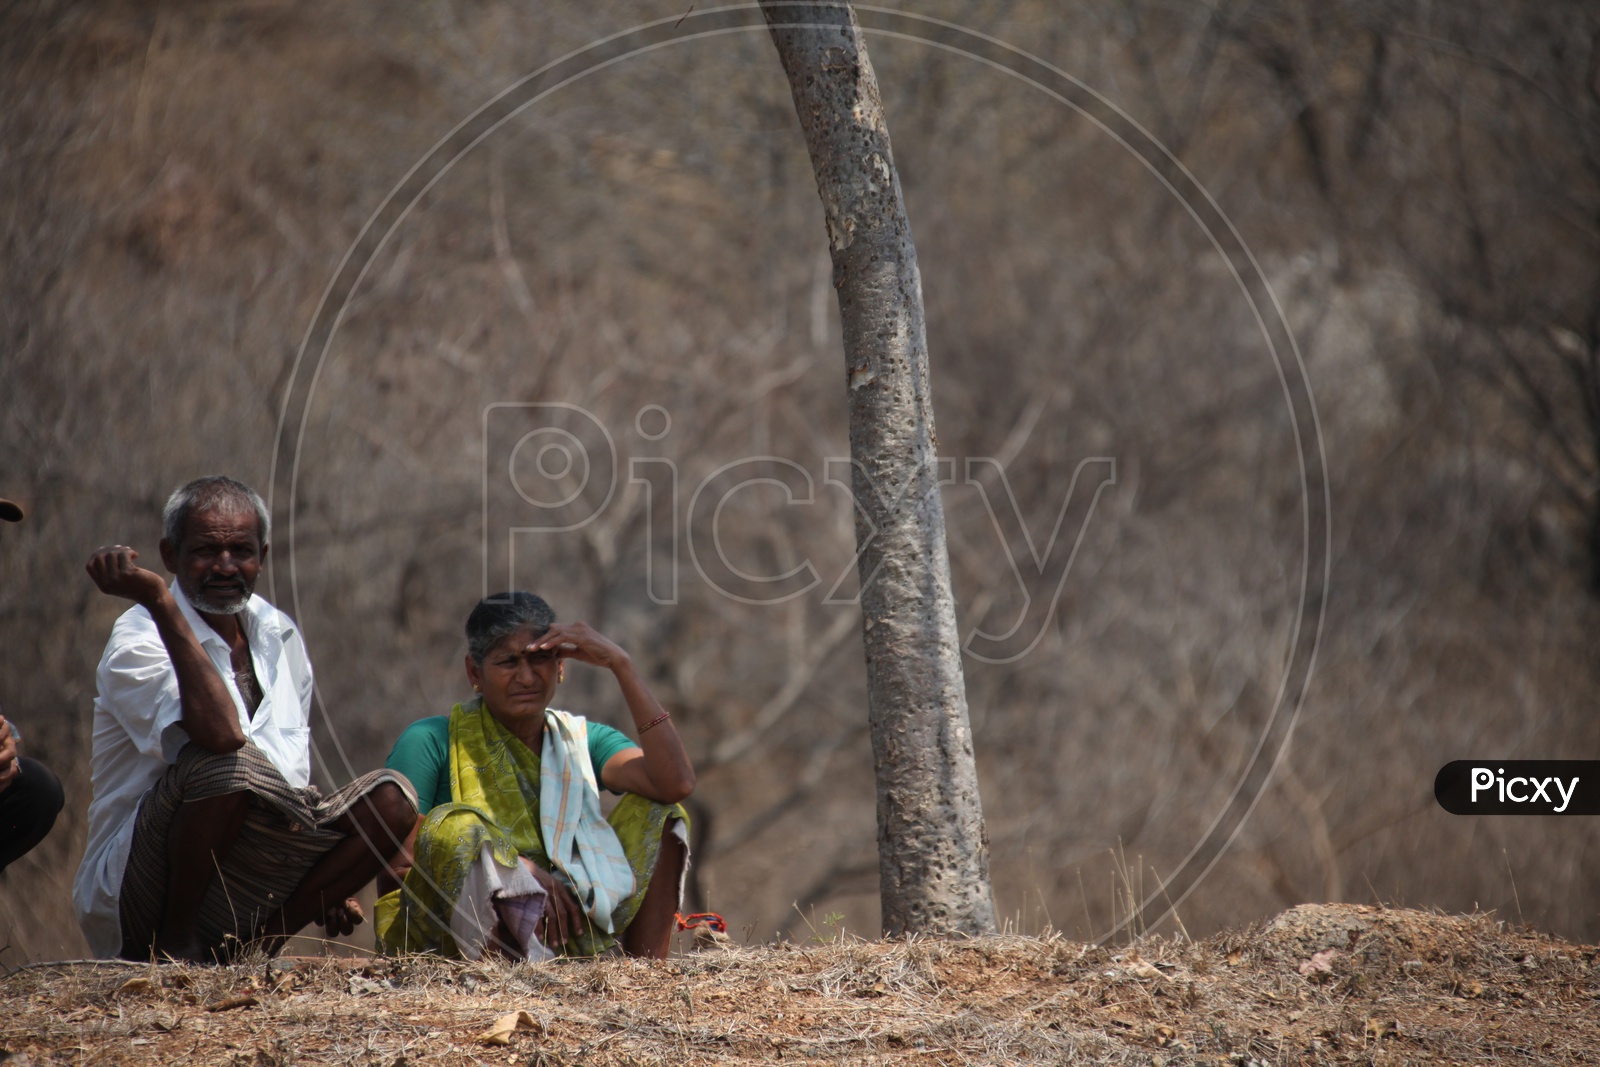 Old couple sitting in a dry land